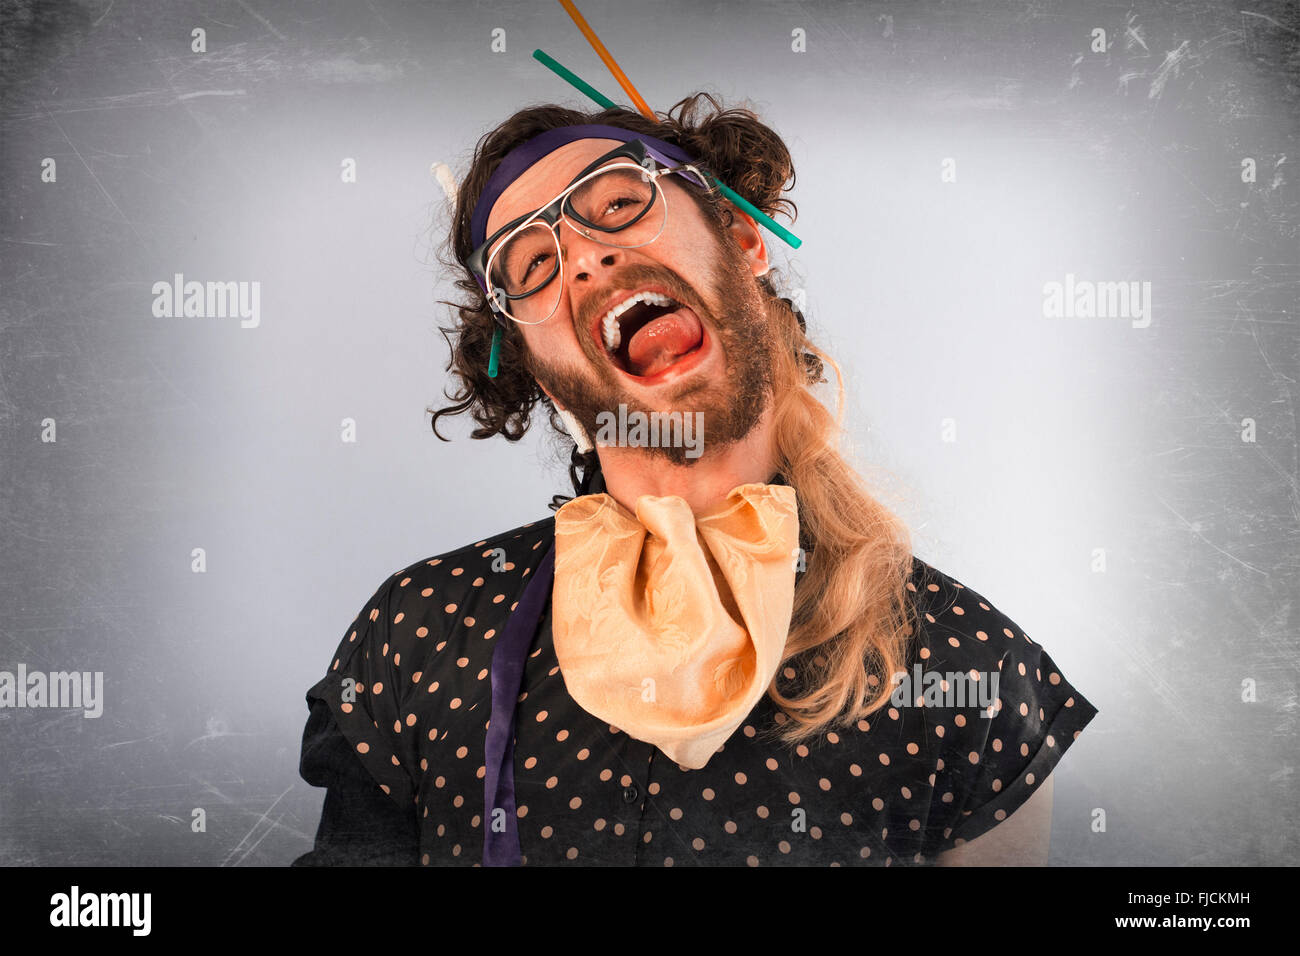 Bearded crazy person lunatic wearing several pairs of glasses Stock Photo